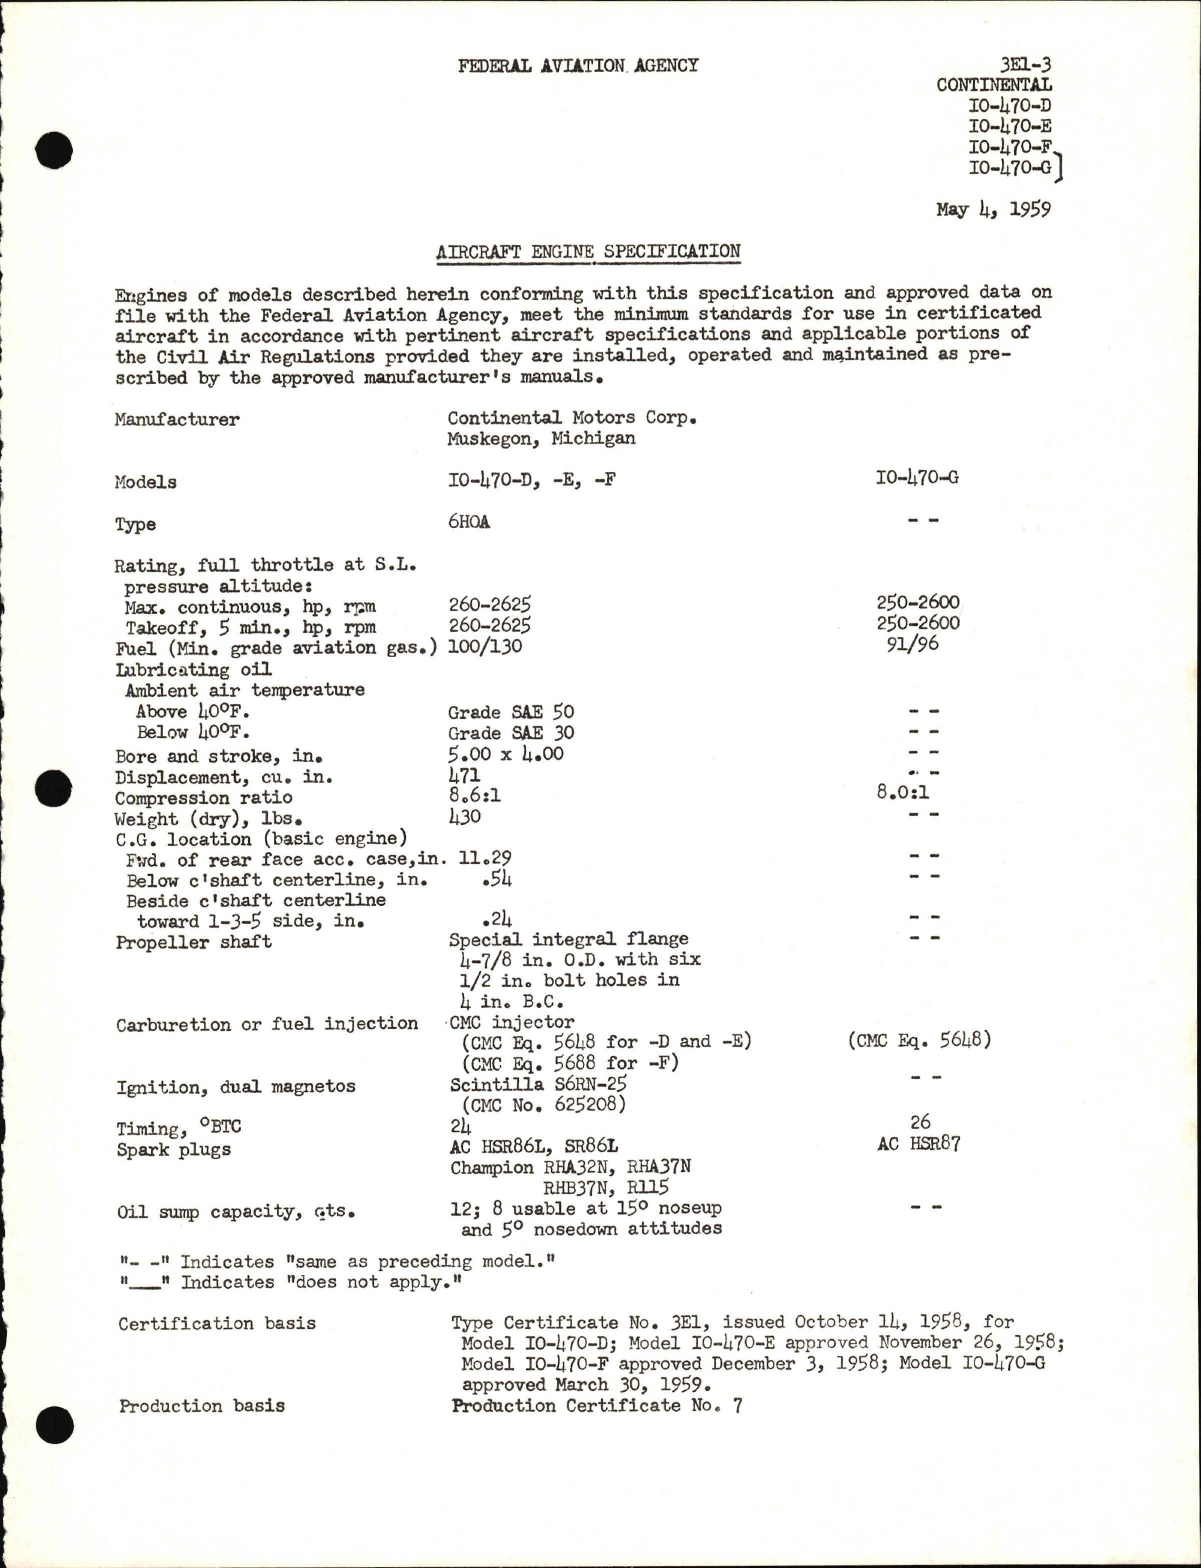 Sample page 1 from AirCorps Library document: IO-470-D, -E, -F, and -G